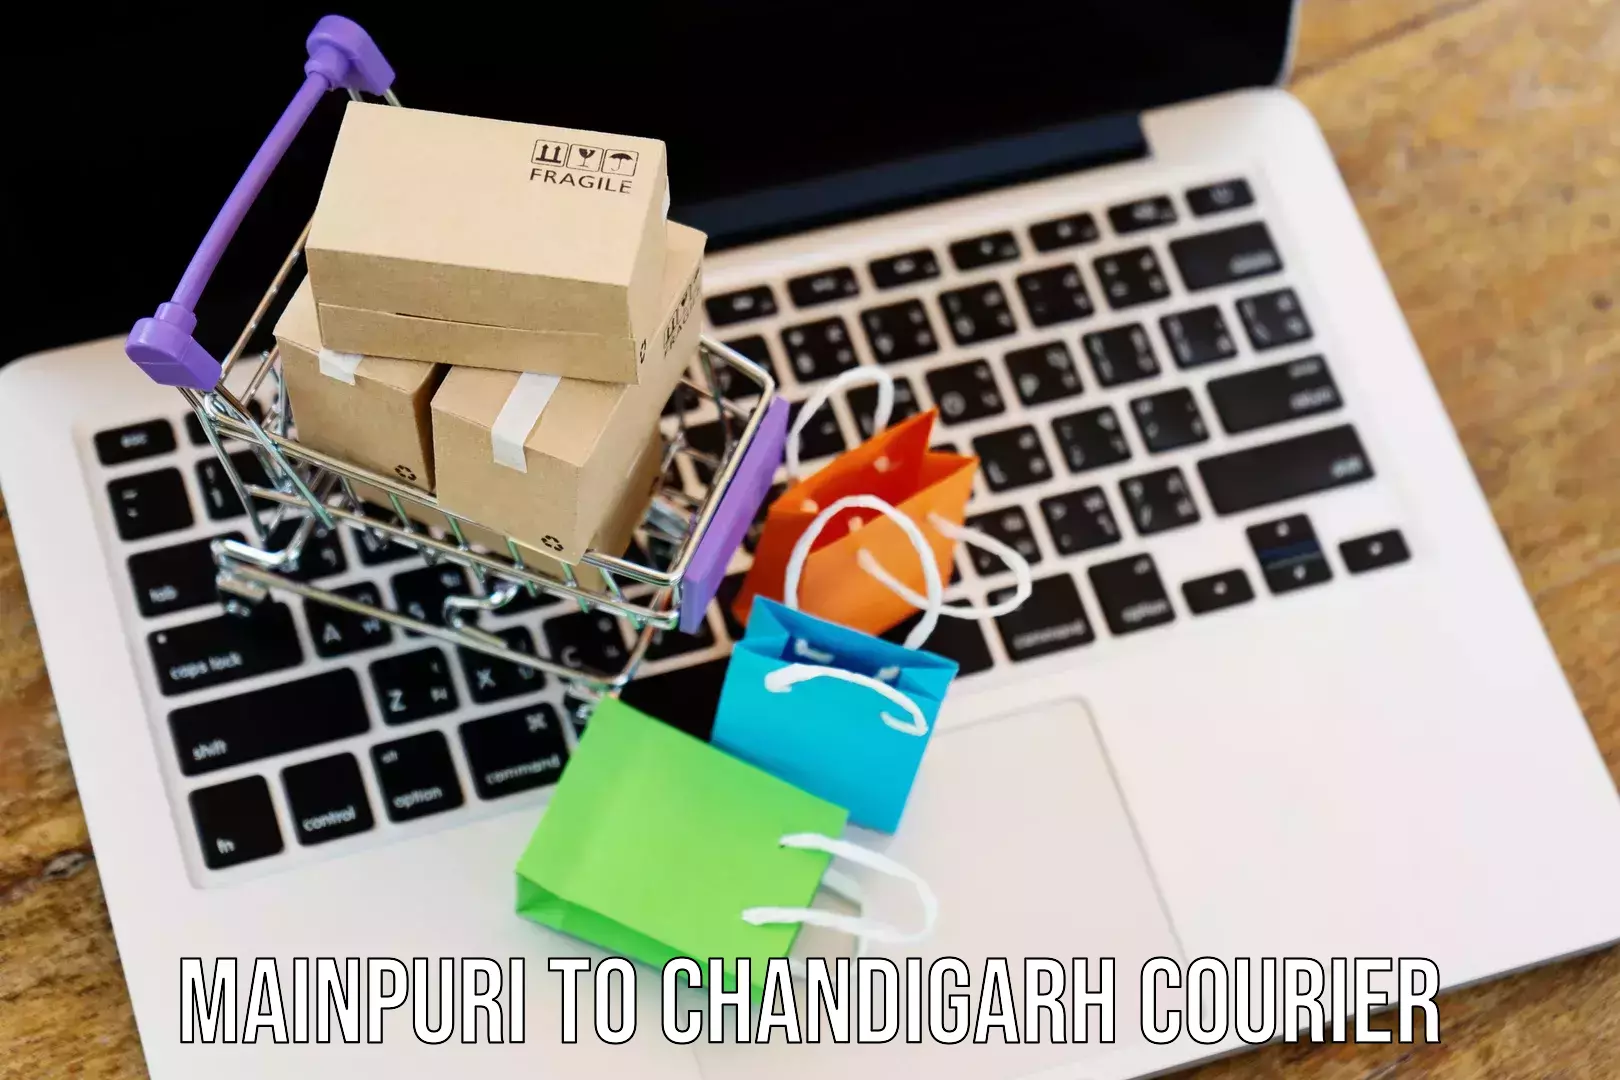 User-friendly delivery service Mainpuri to Chandigarh